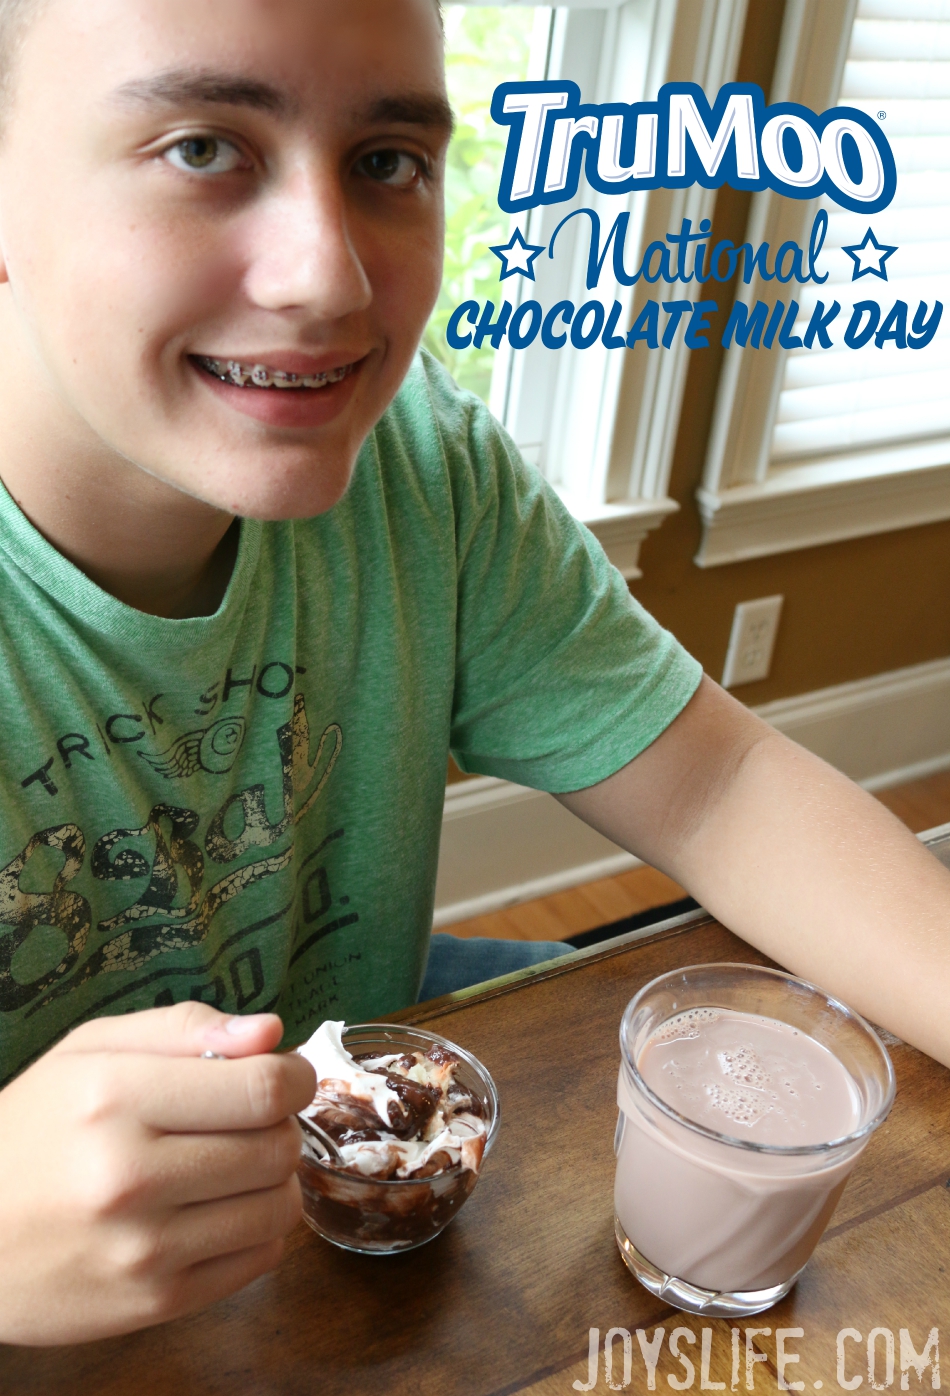 Make a Deconstructed Chocolate Pie for National Chocolate Milk Day #NationalChocolateMilkDay or any day!